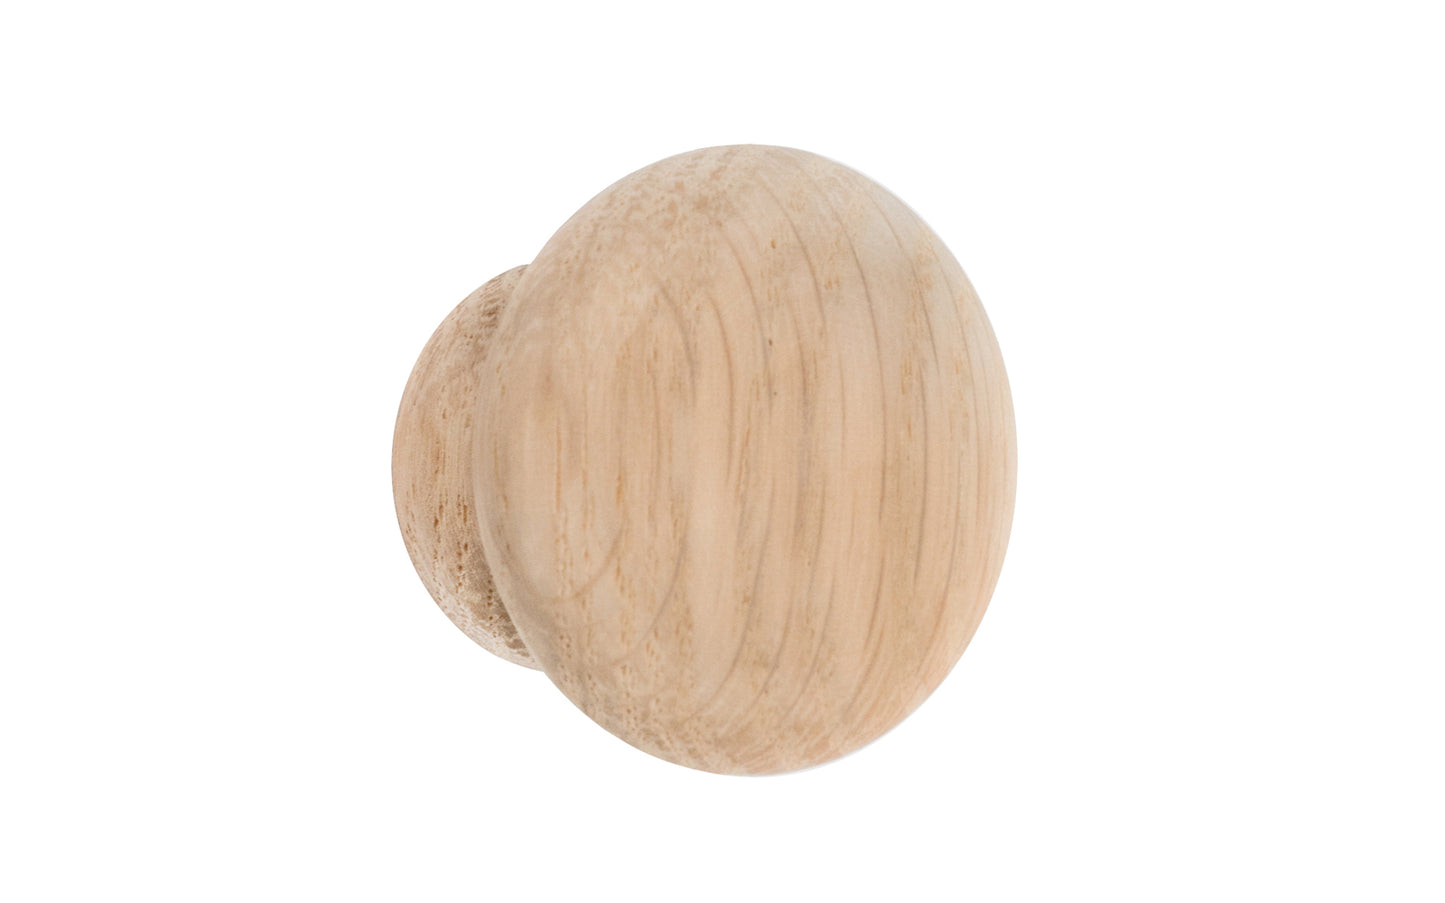 A classic oak wood round cabinet knob, & may be stained, painted, or varnished if desired. Late 19th Century, American-Oak, Craftsman style of hardware. Great for a wide variety of uses including drawers, kitchen cabinets, smaller doors, furniture, cabinet doors. 1-1/4" diameter knob.